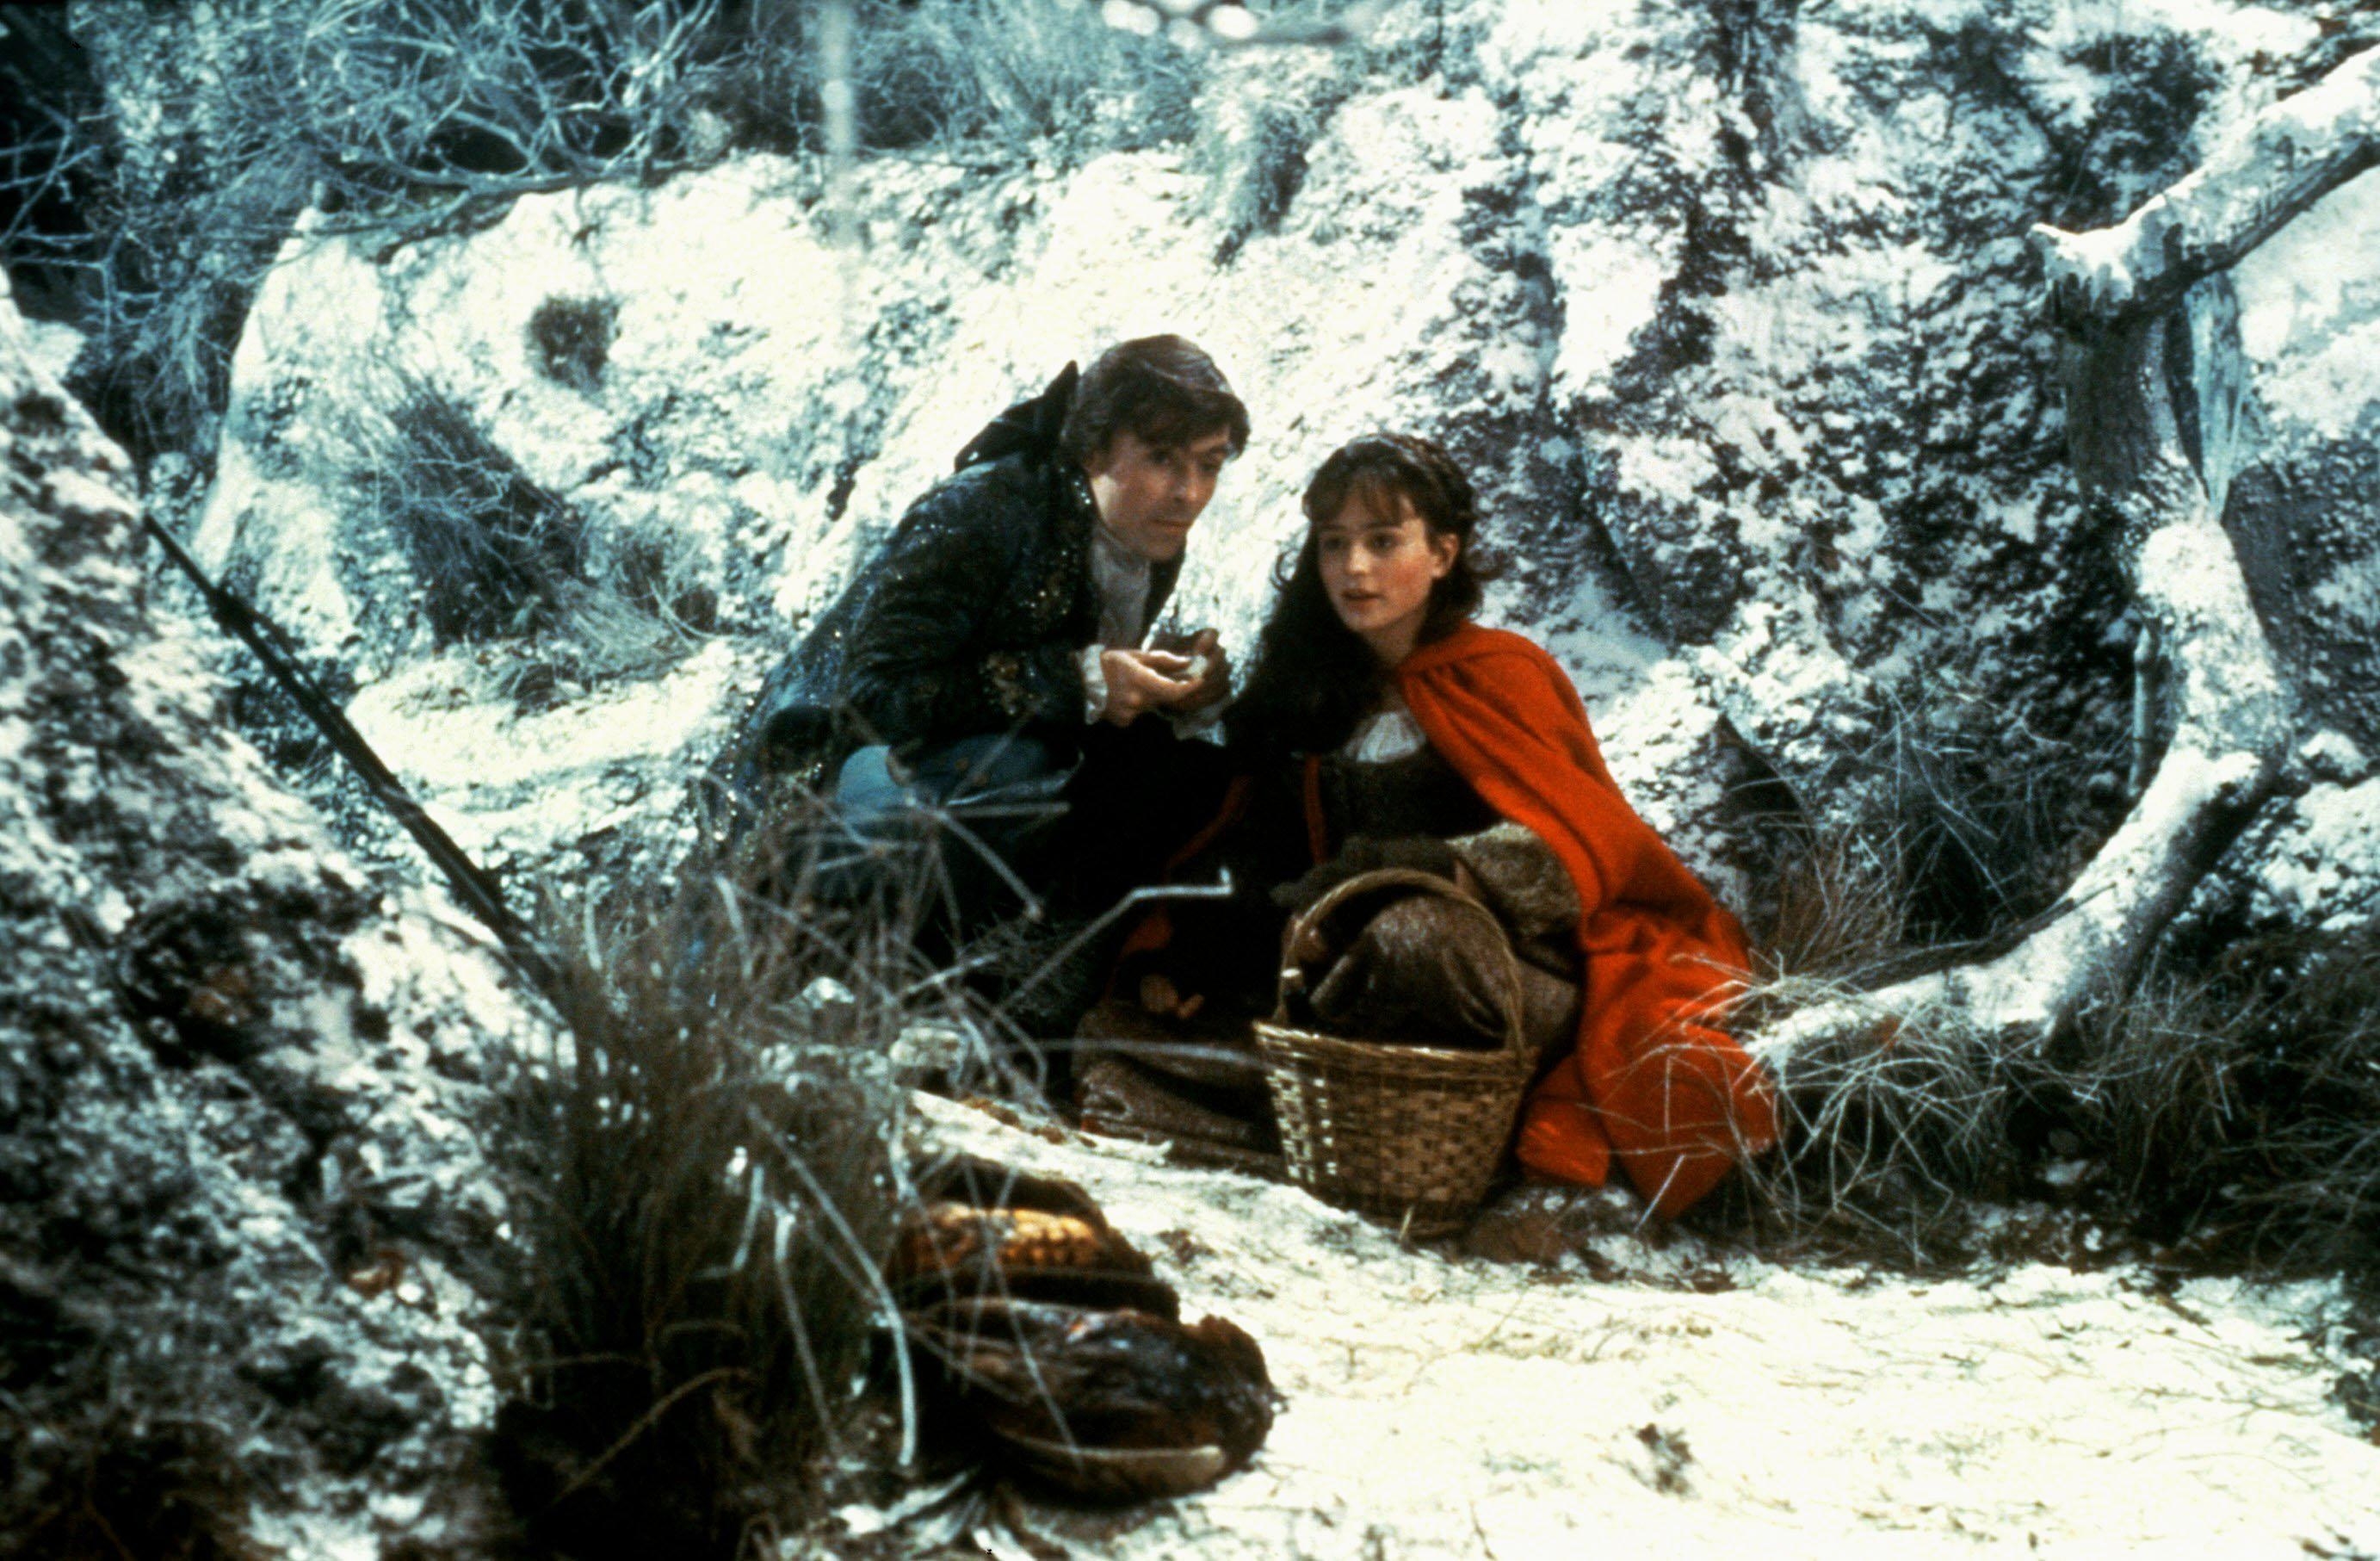 A young woman and her potential suitor picnic in a snowy woodland in &quot;The Company of Wolves&quot;